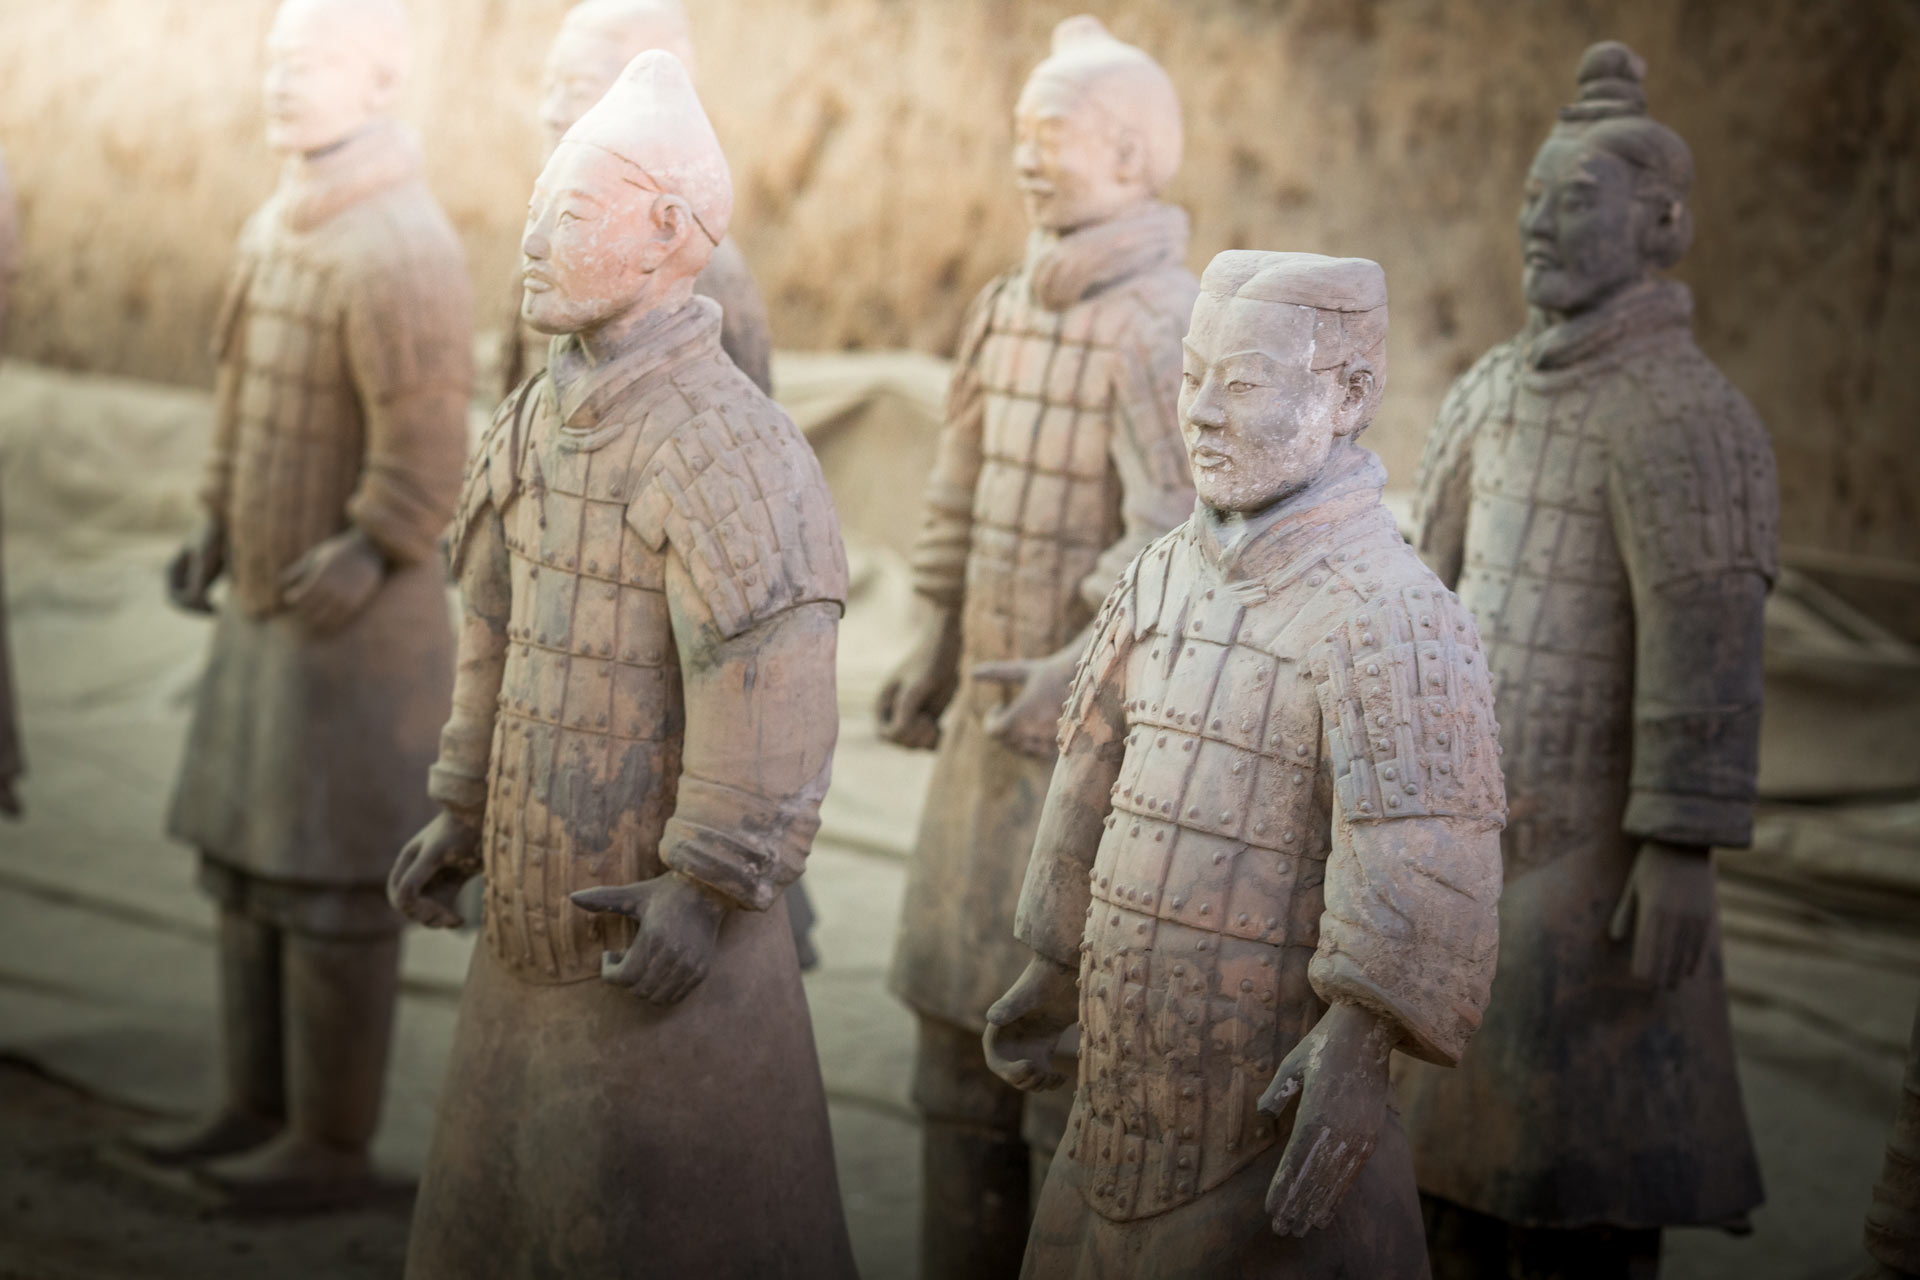 the terracotta warriors of Emperor Qin in Xi'an - 10 days in China itinerary - best things to do